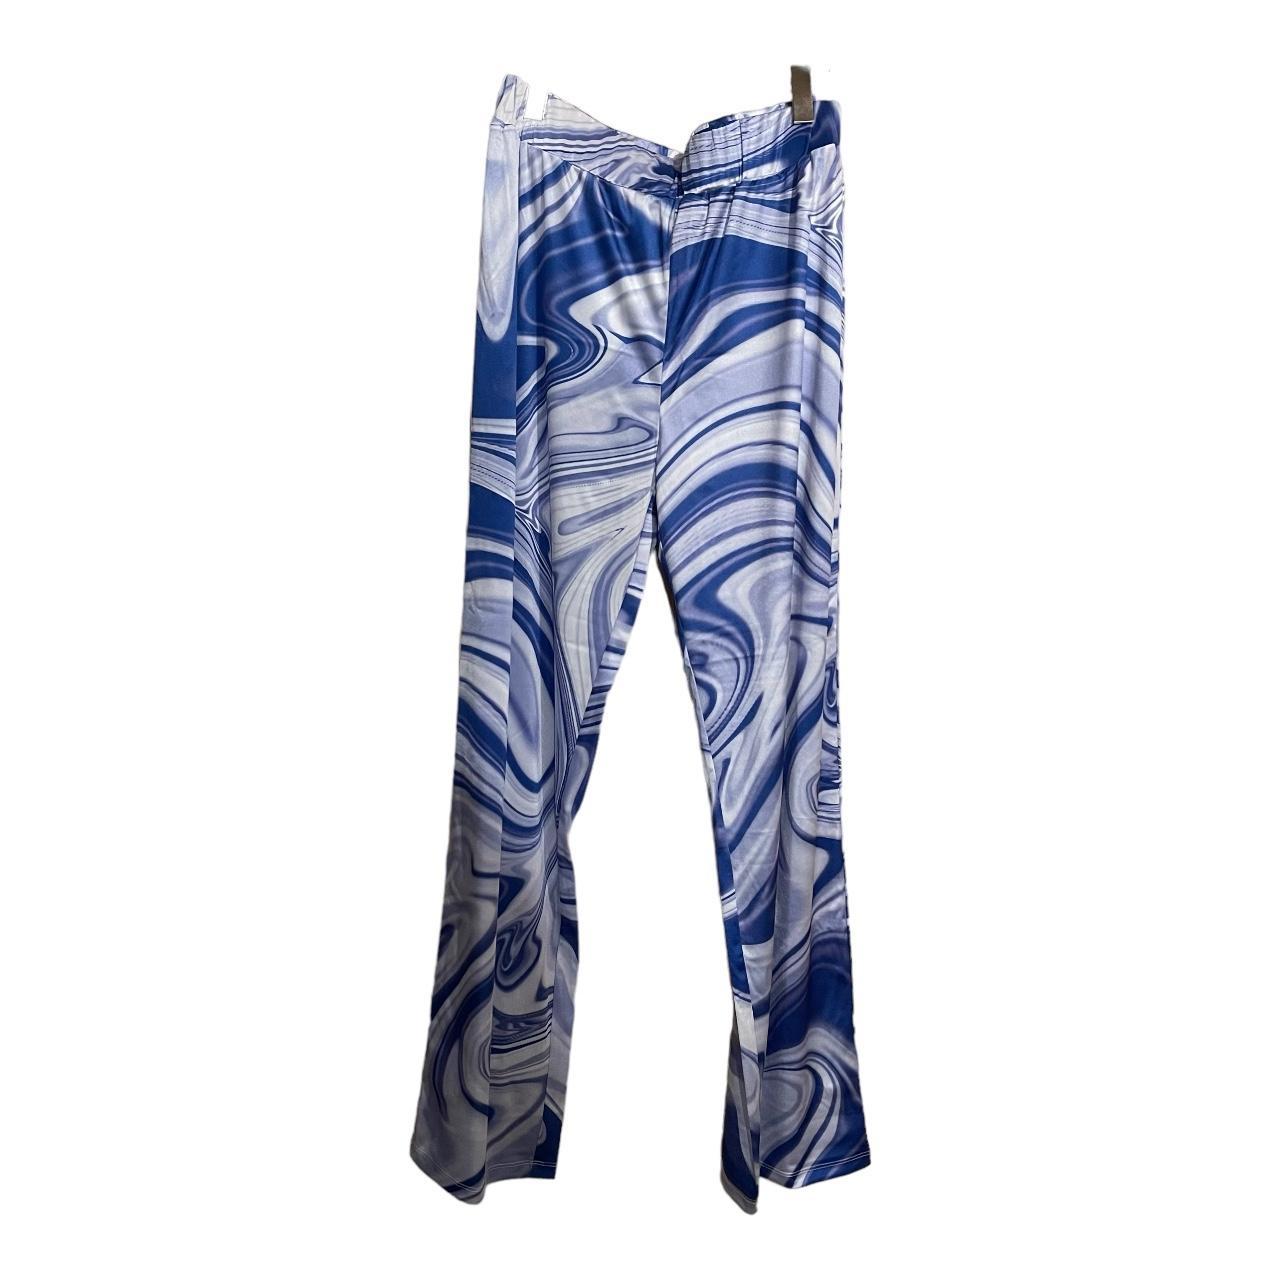 Hosbjerg Women's Blue and White Trousers